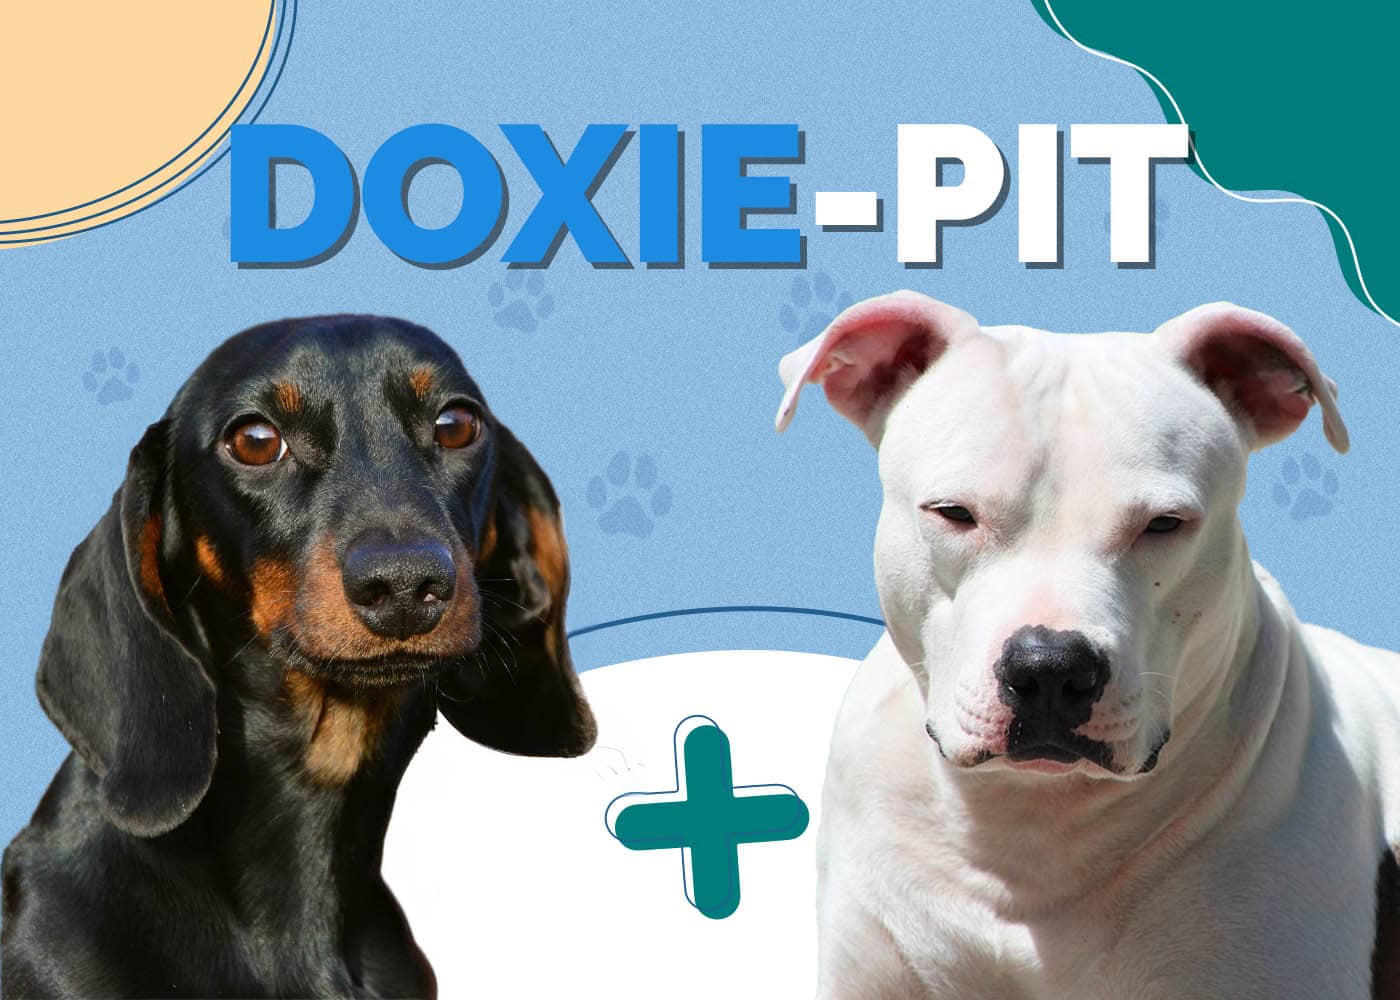 Doxie-Pit (American Pitbull Terrier & Dachshund Mix)